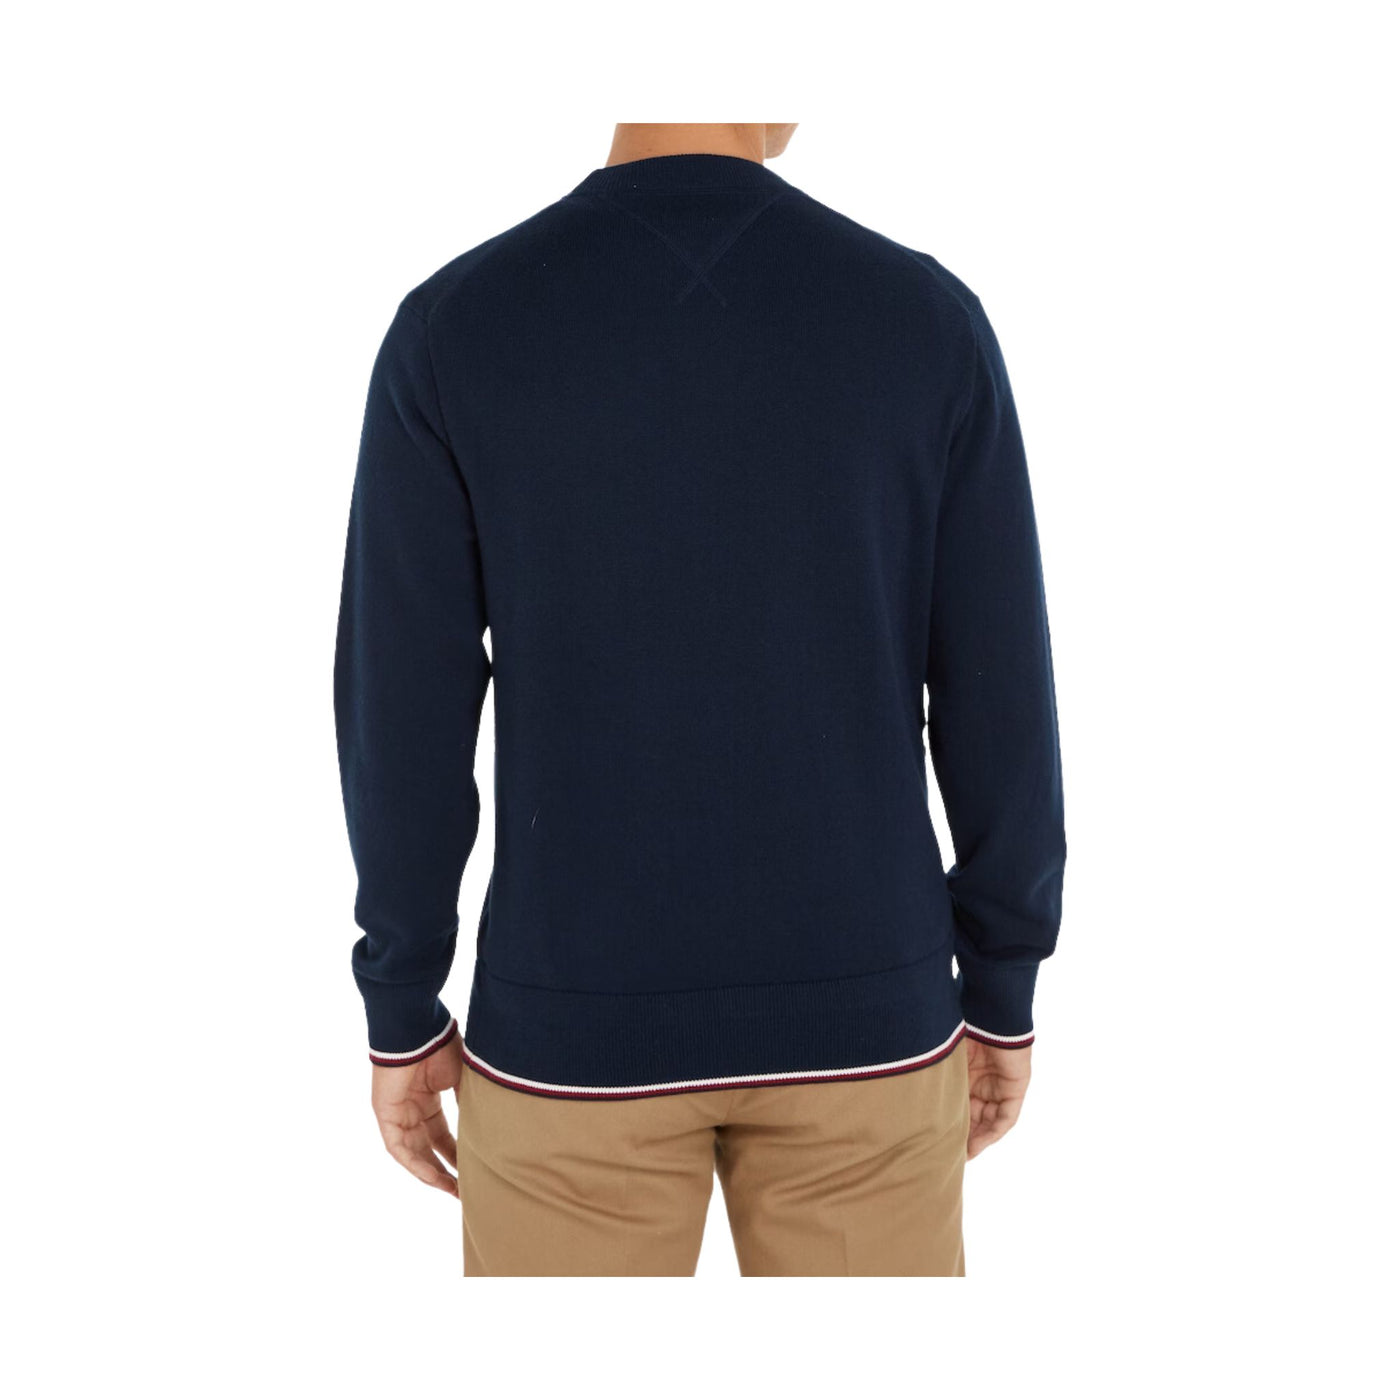 Men's sweater with logo patch